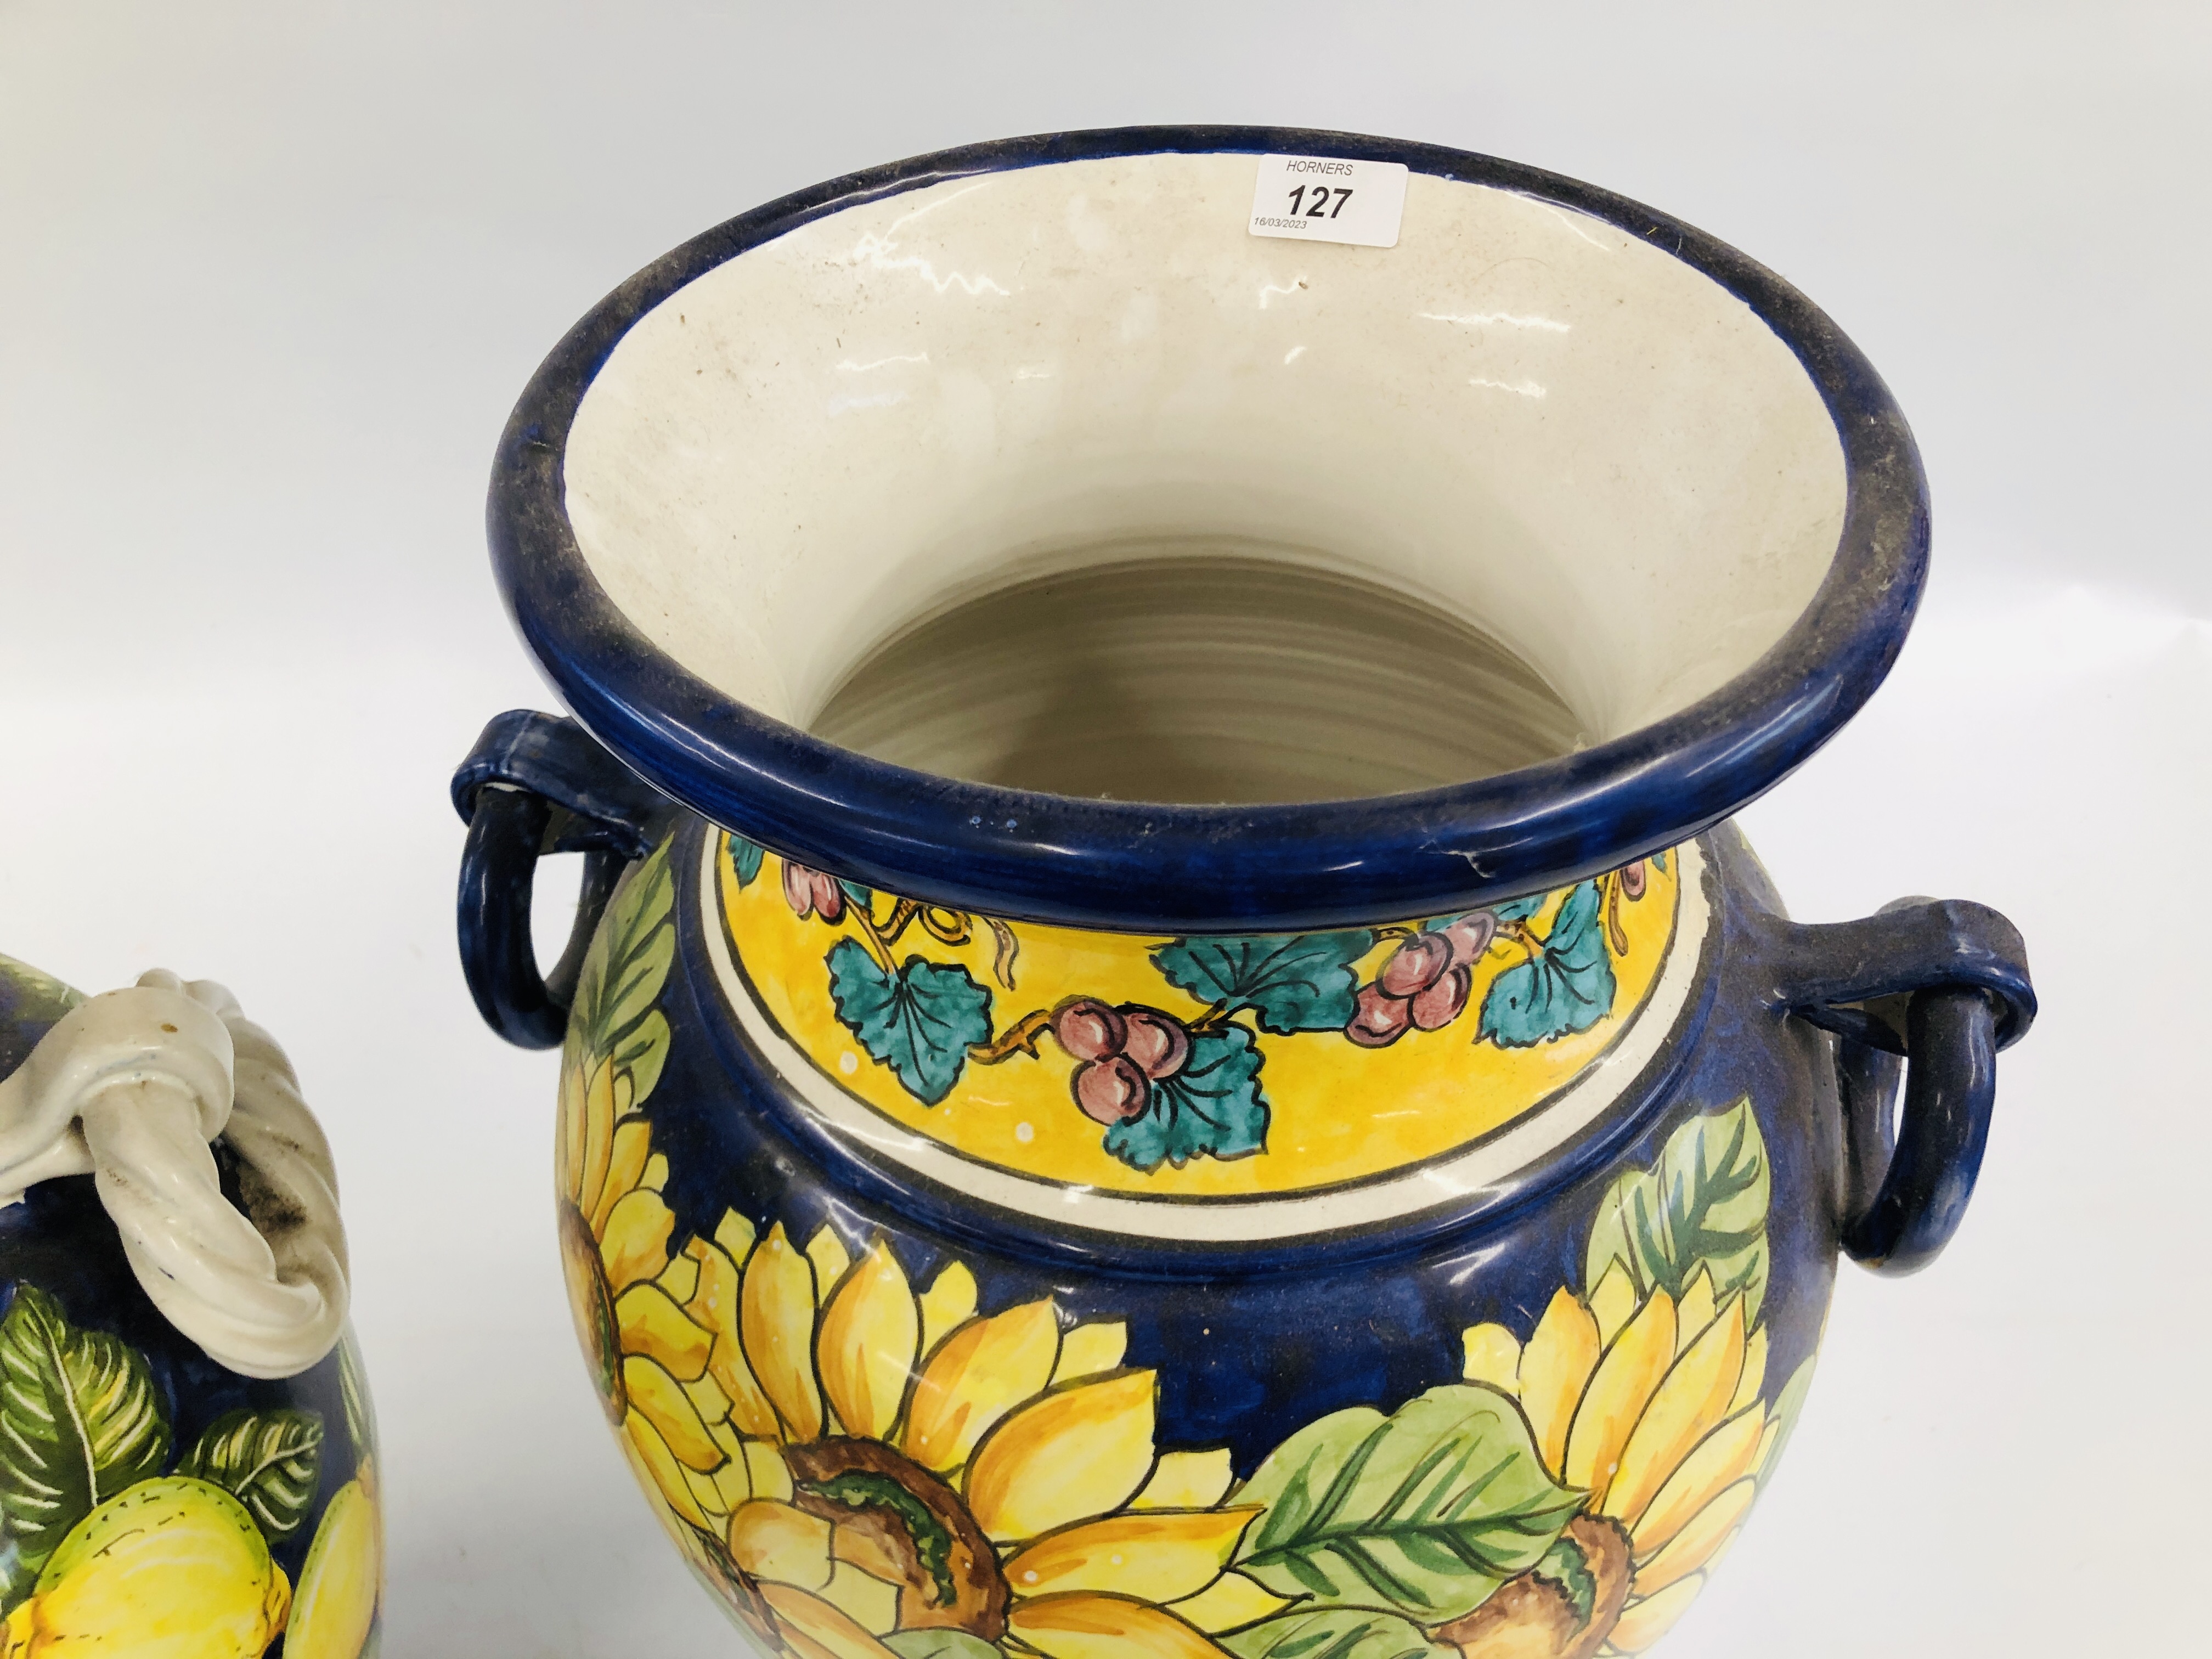 TWO LARGE CONTINENTAL GLAZED VASES ONE DECORATED WITH SUNFLOWERS, H 55.5CM THE OTHER LEMONS, H 56CM. - Image 3 of 9